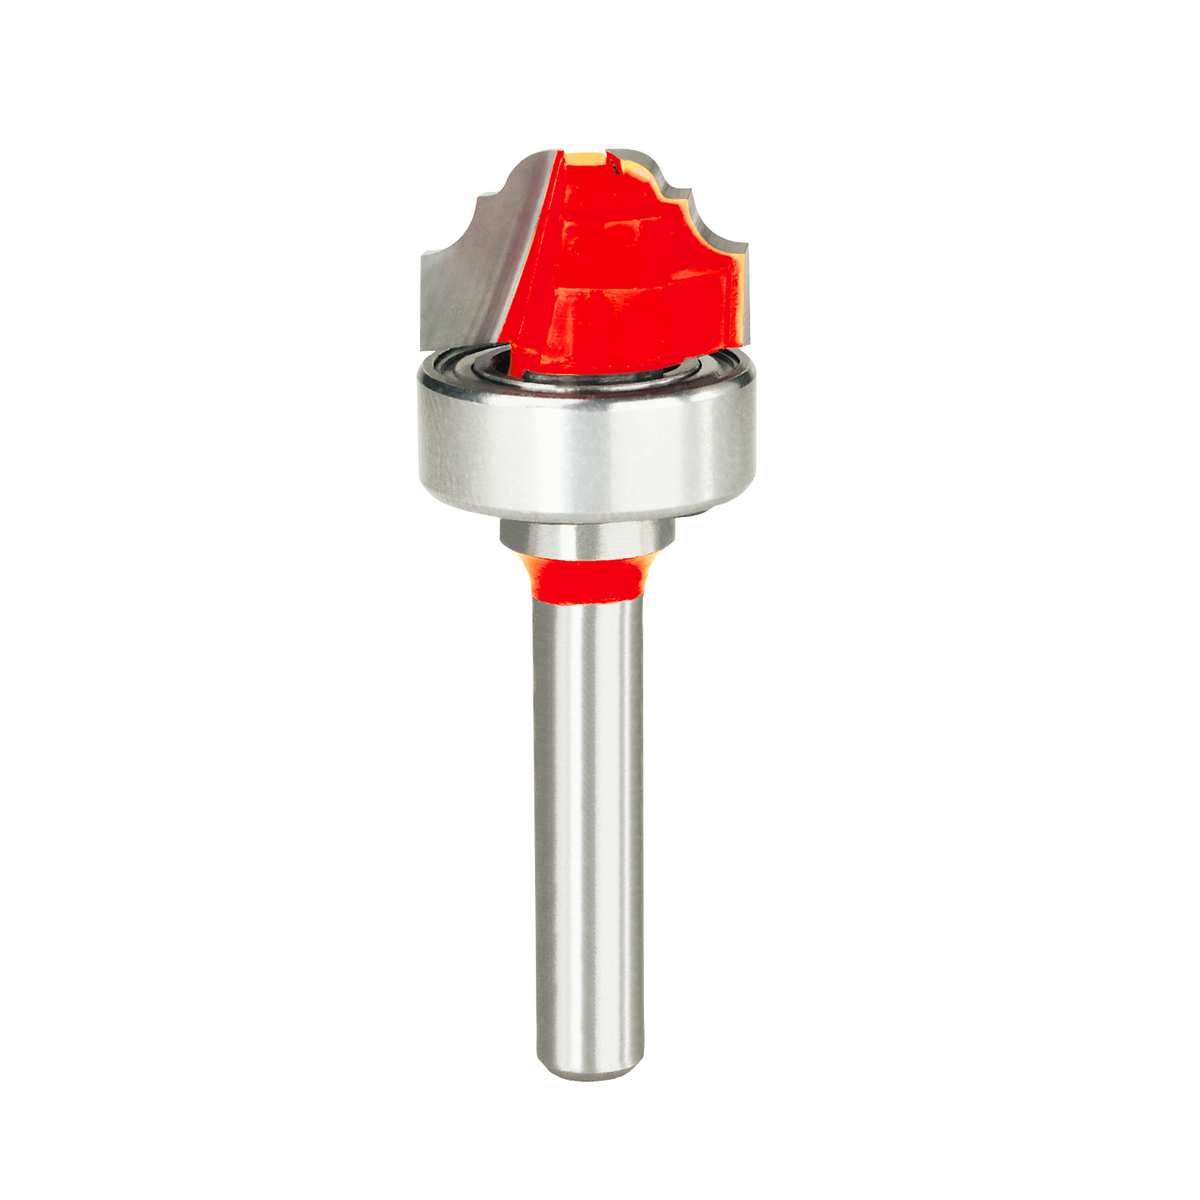 Freud Top Bearing Classical Cove & Bead Router Bits